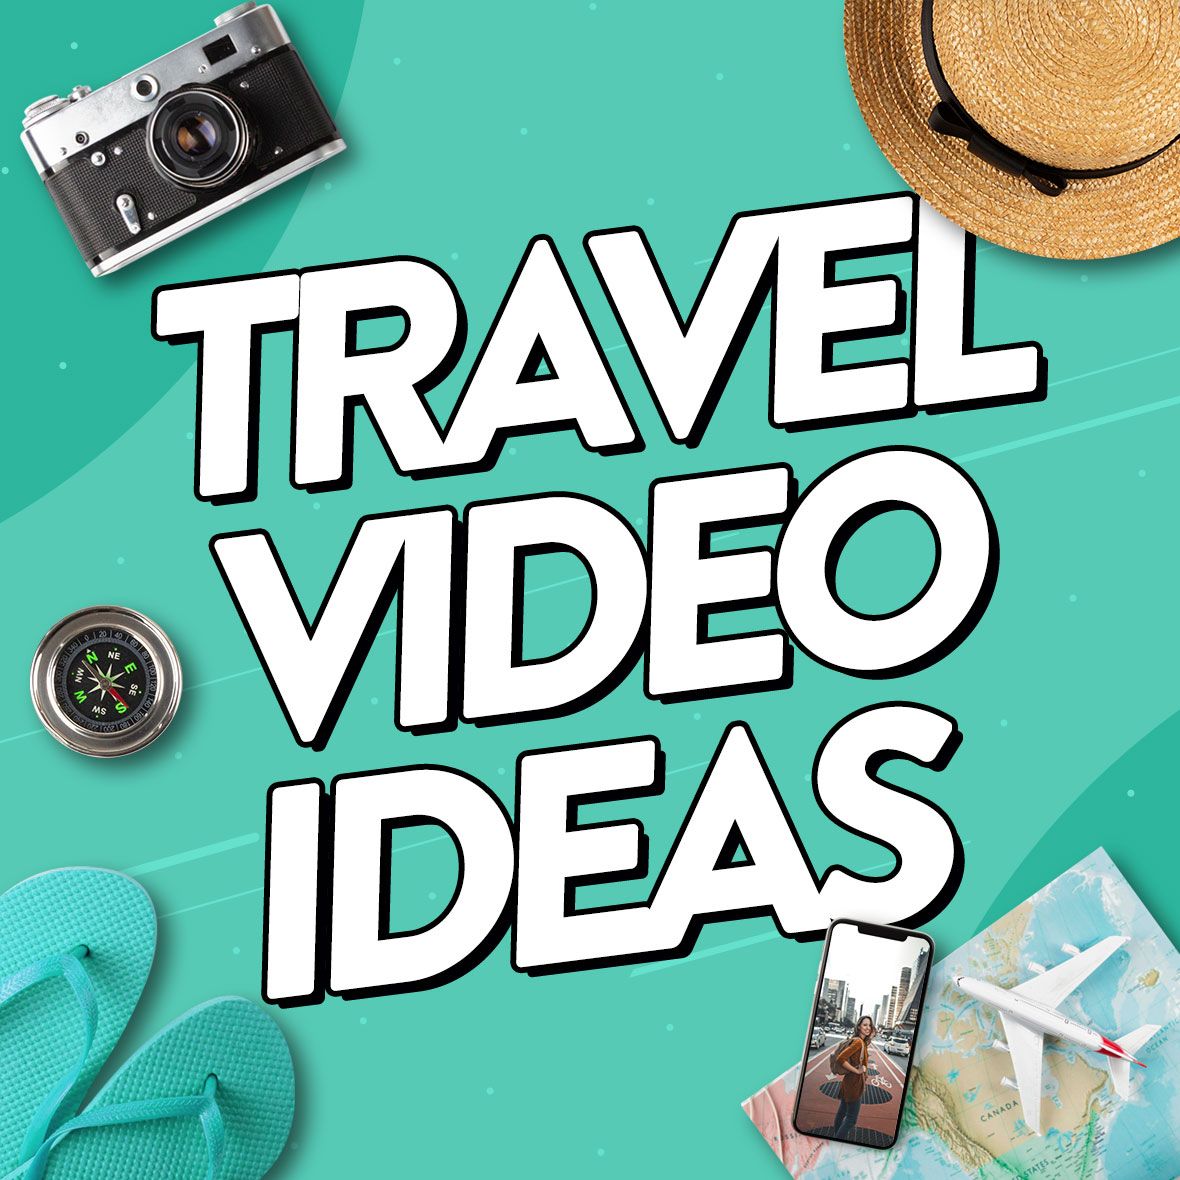 good background songs for travel videos